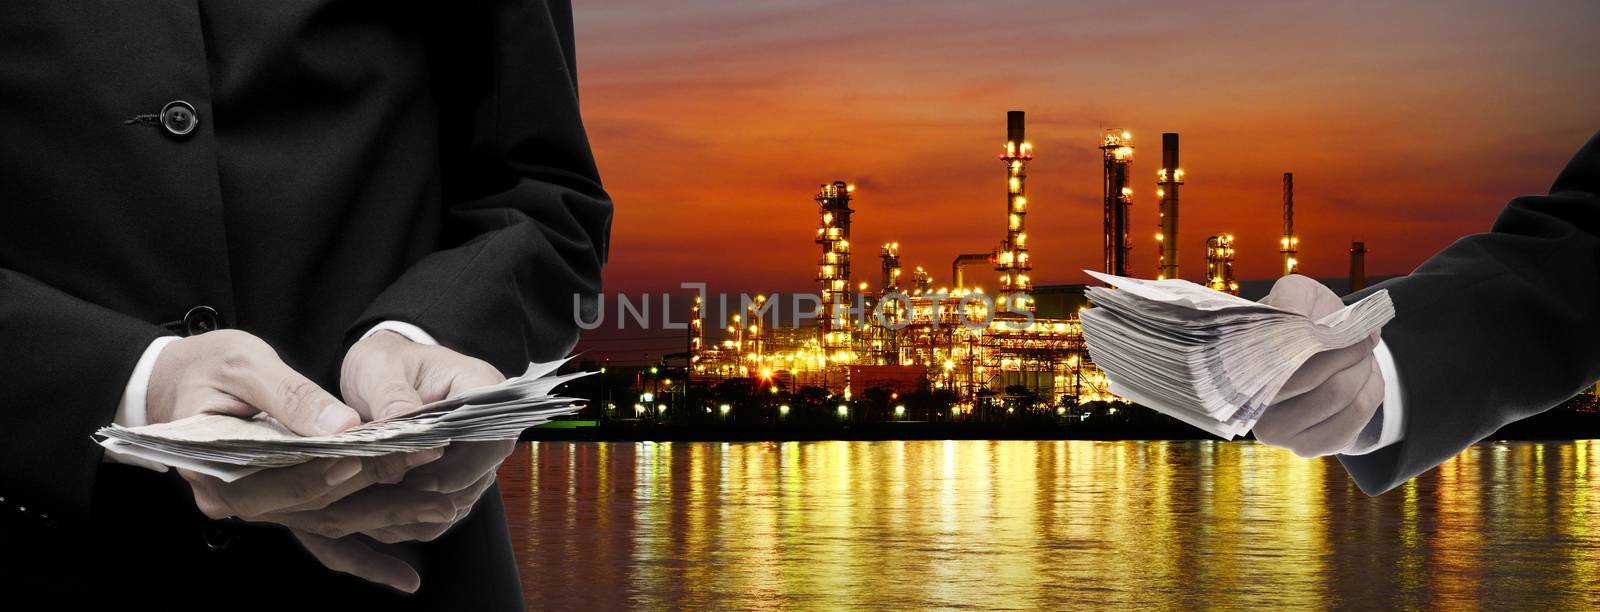 Make money from oil refinery business concept by pixbox77